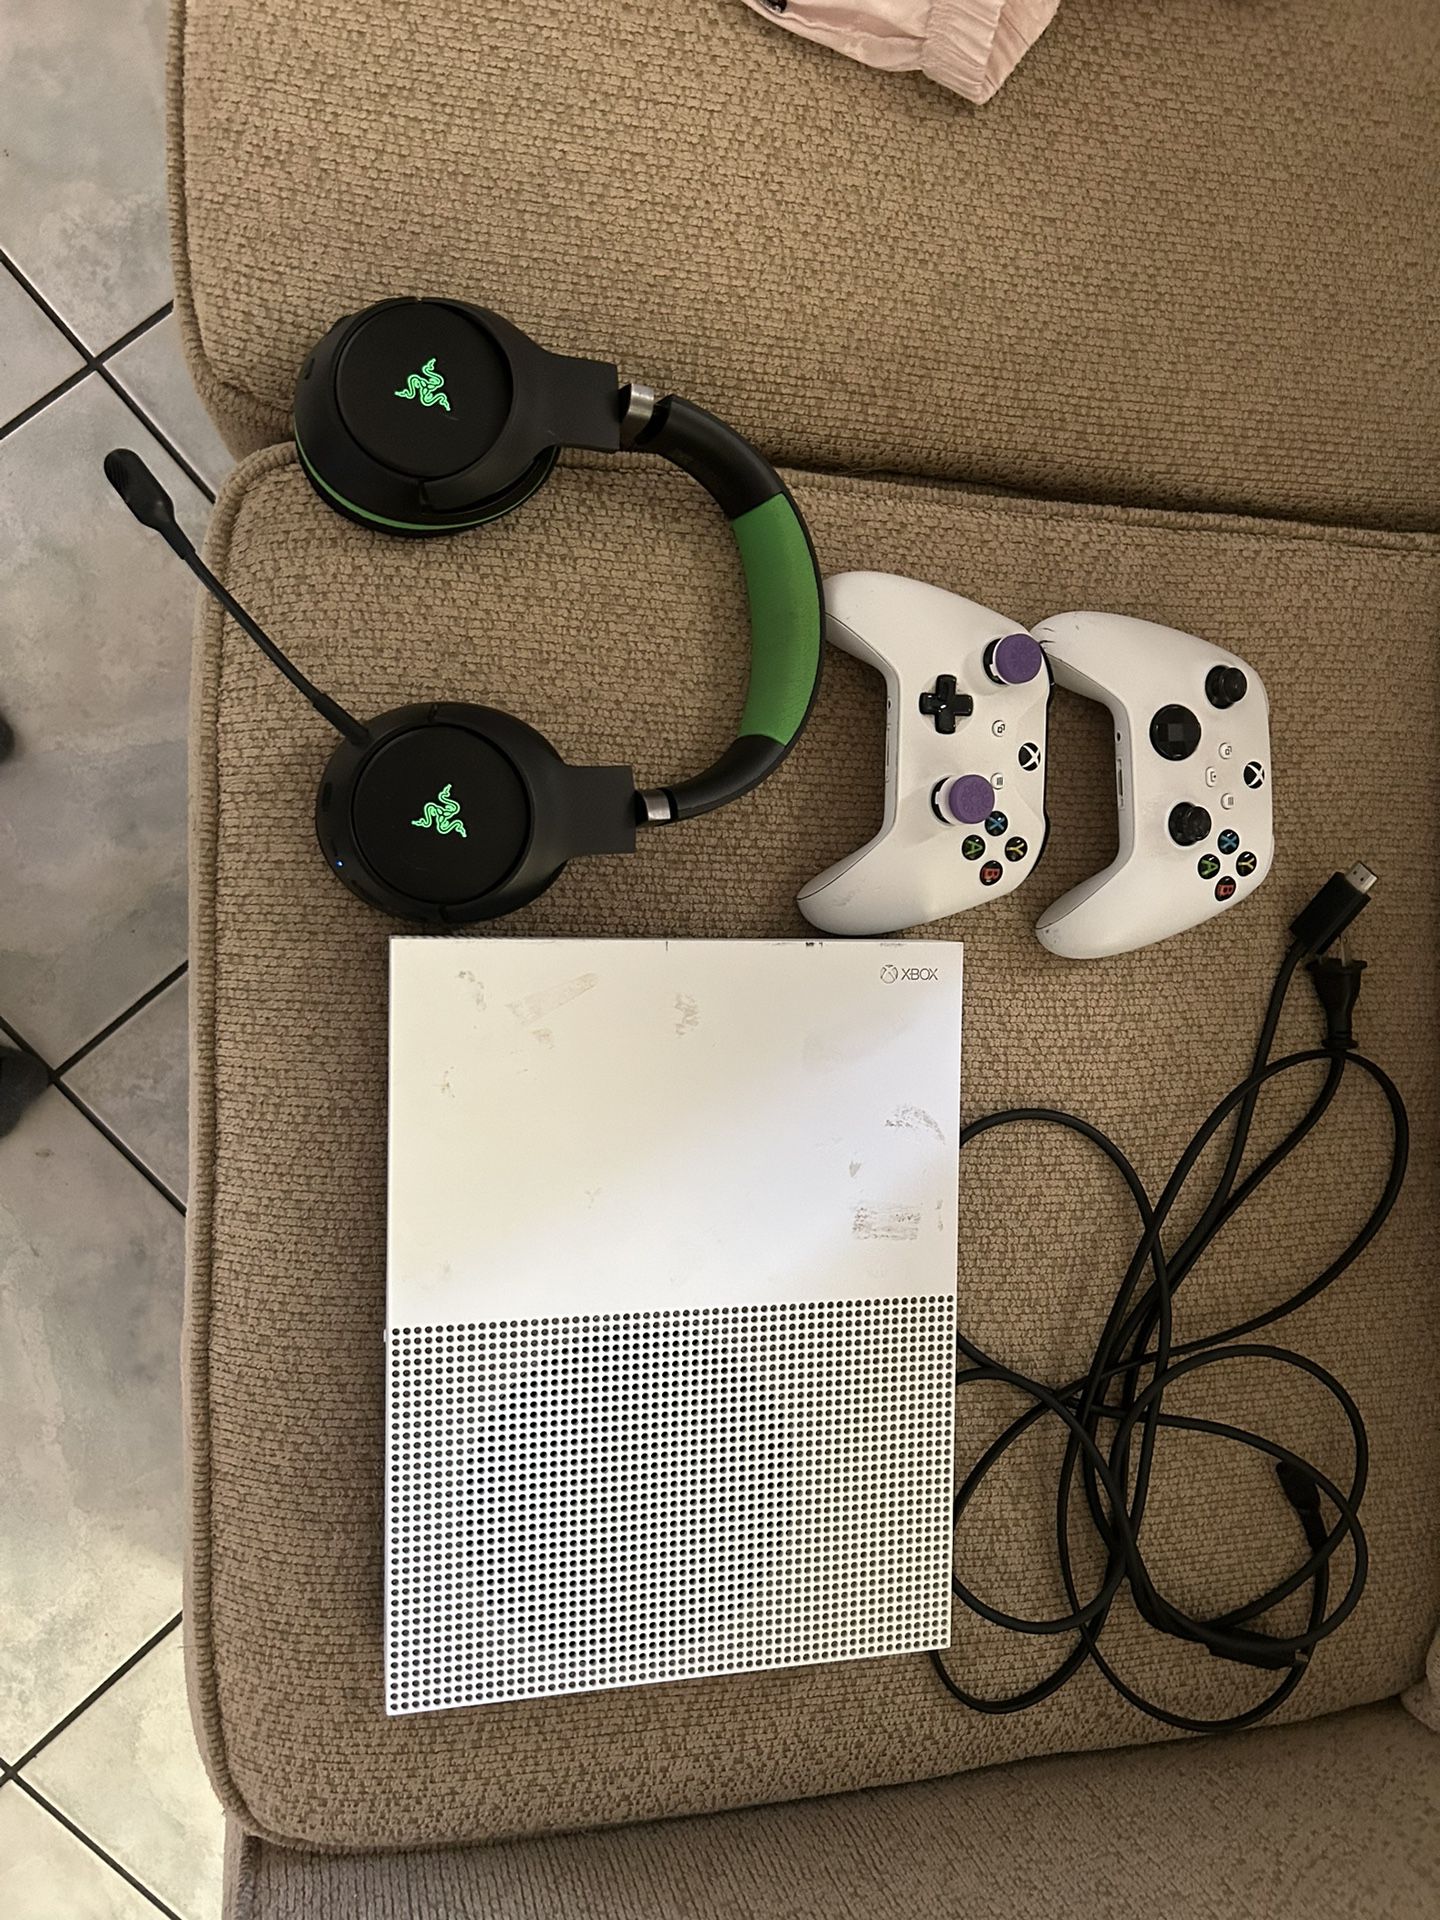 Xbox One S + Bluetooth Headset, Razor+ Two Controllers